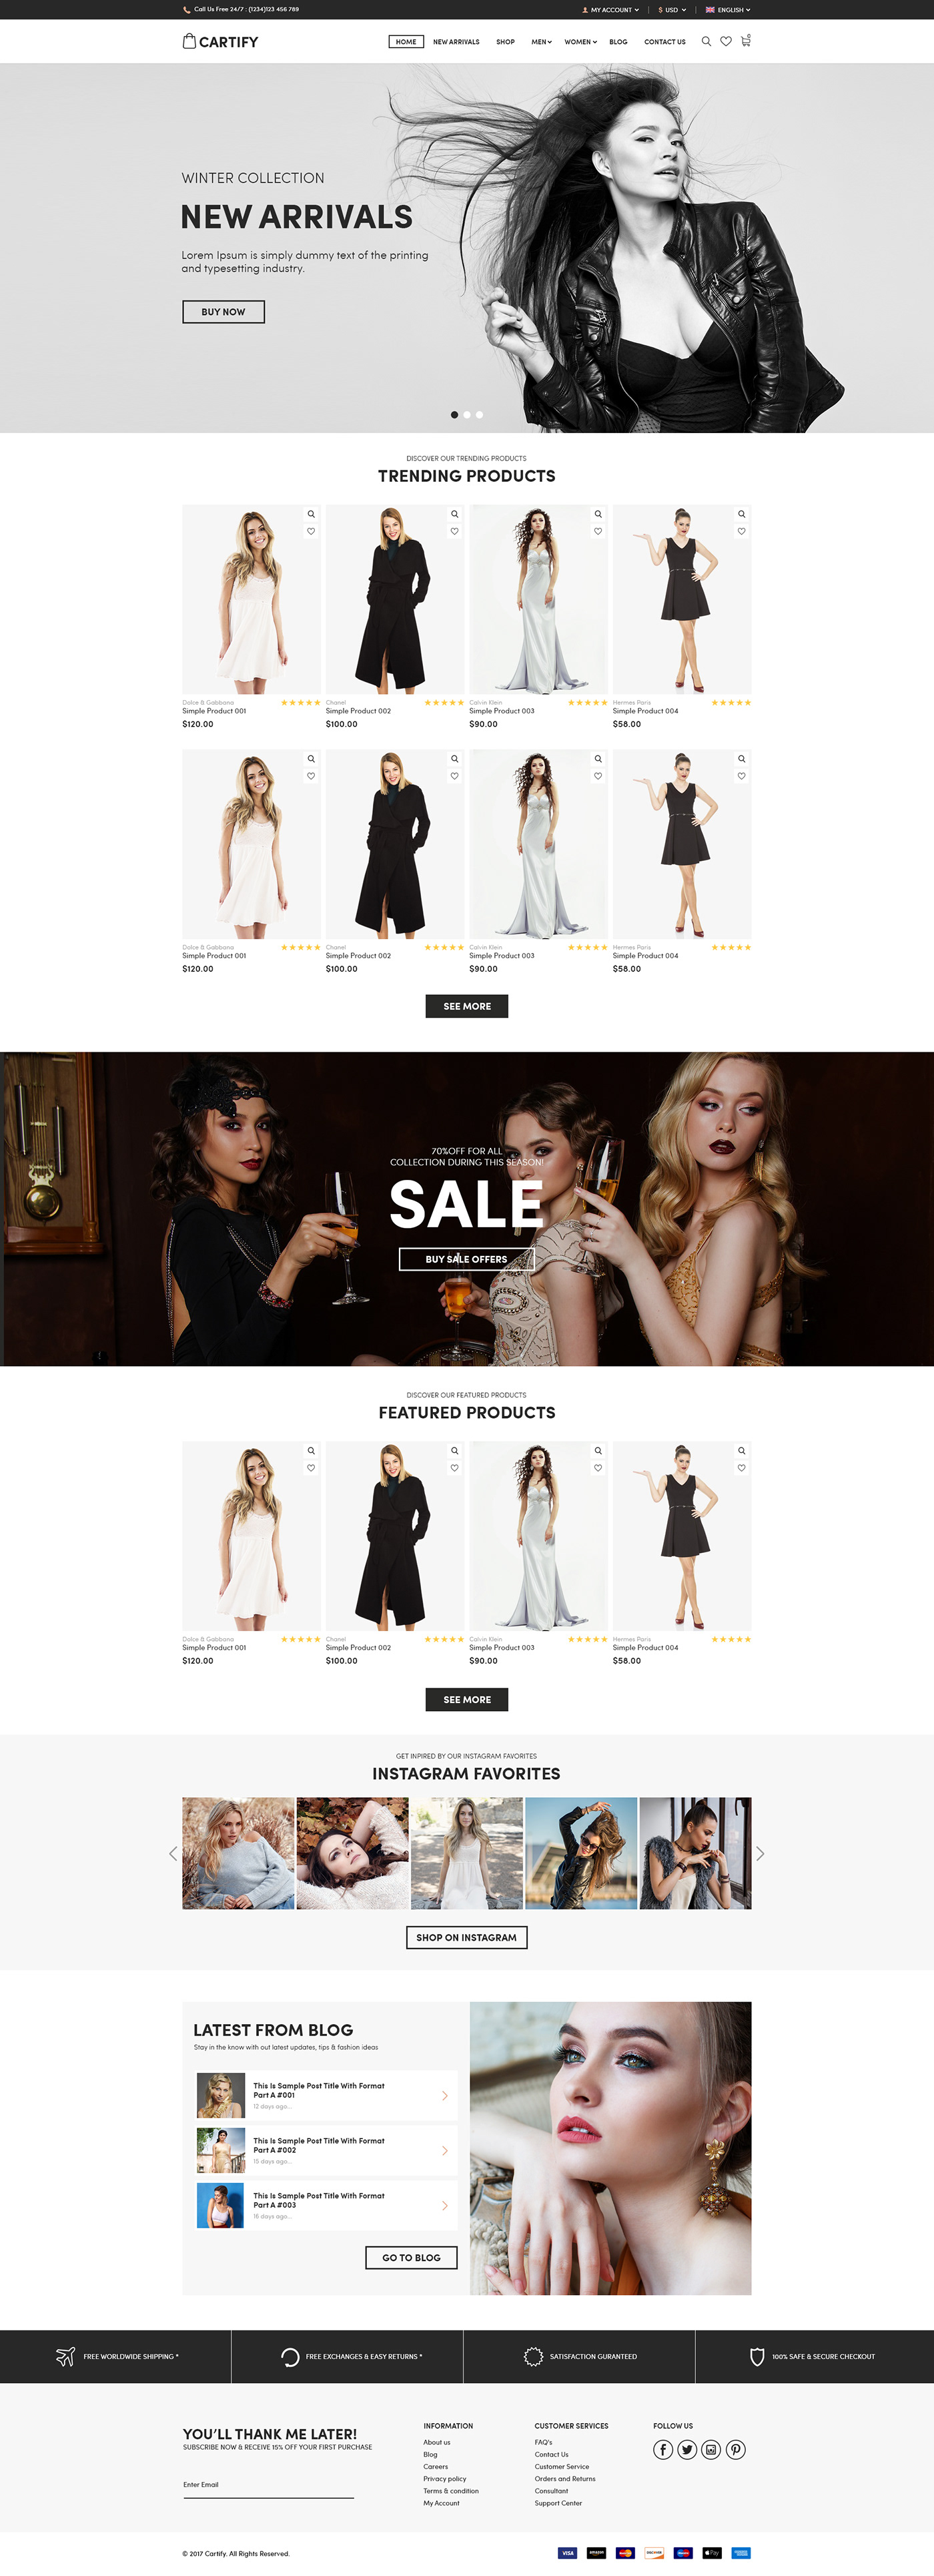 ecommerce web template Cartify template psd Shopping Web template Web UI Design creative web template Fashion Web Template Fashion Website Design eCommerce website design Website UI design fashion style website